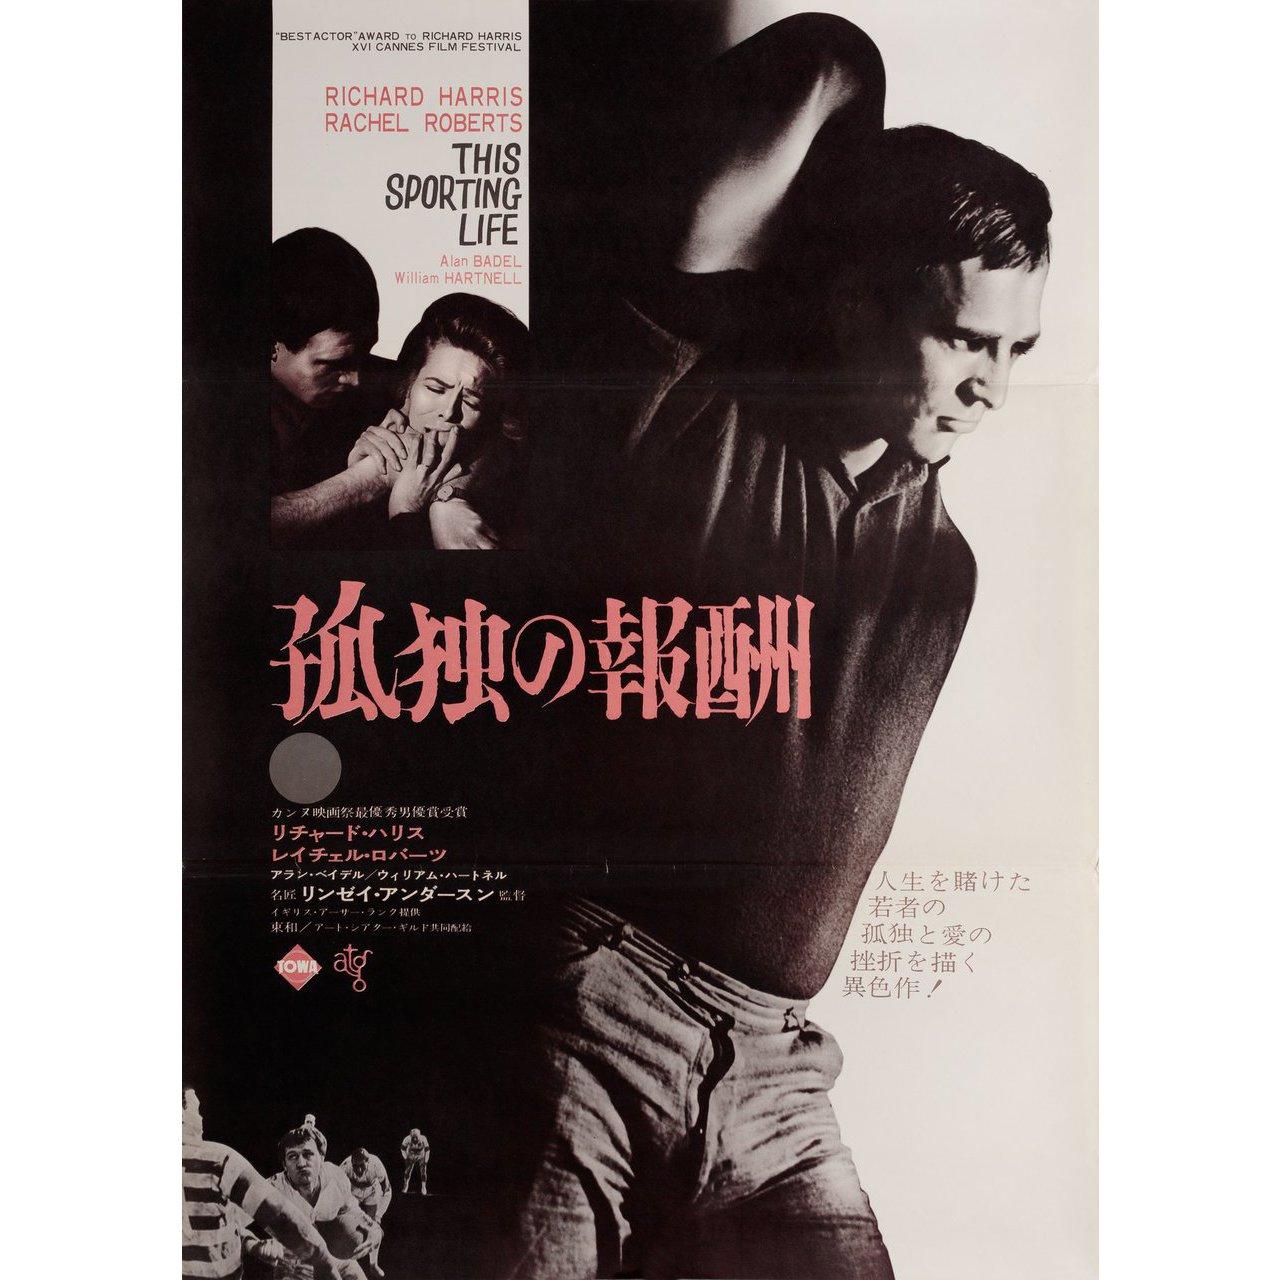 Original 1963 Japanese B2 poster for the film This Sporting Life directed by Lindsay Anderson with Richard Harris / Rachel Roberts / Alan Badel / William Hartnell. Very Good-Fine condition, folded. Many original posters were issued folded or were